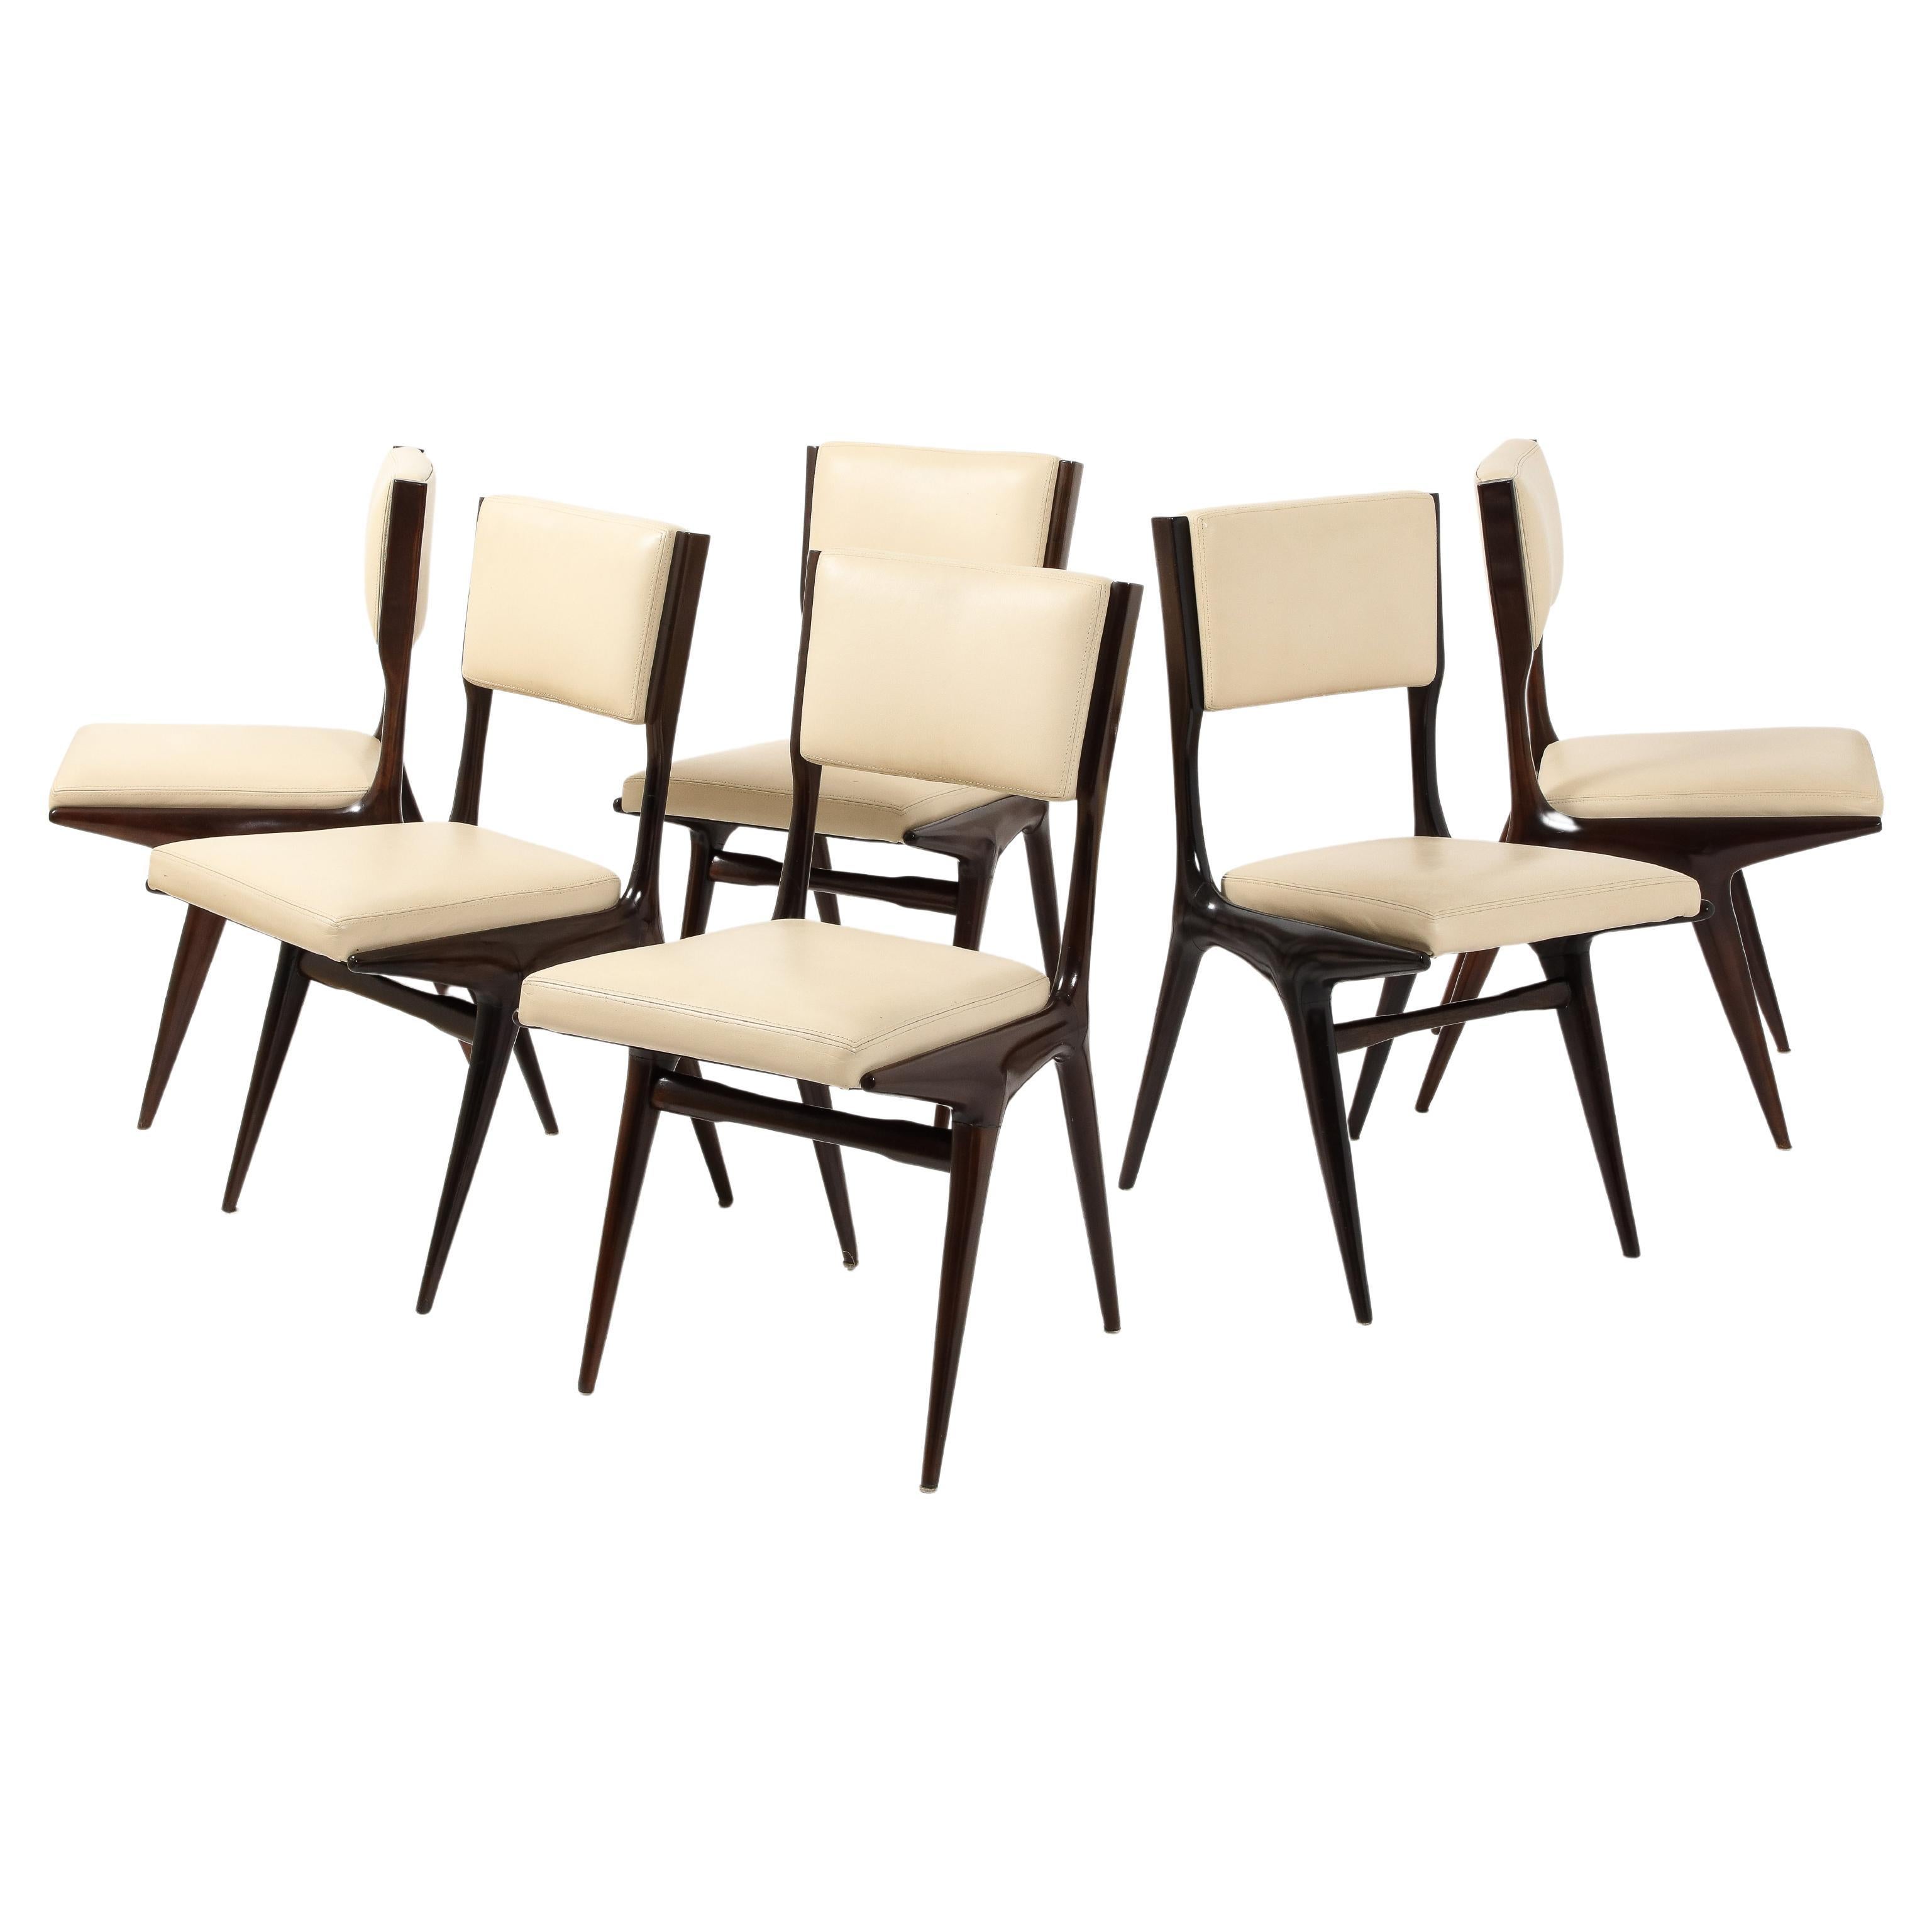 An early set of six Carlo de Carli N63 chairs in a dark finish, reupholstered in leather in early 2000. COM is available on request.